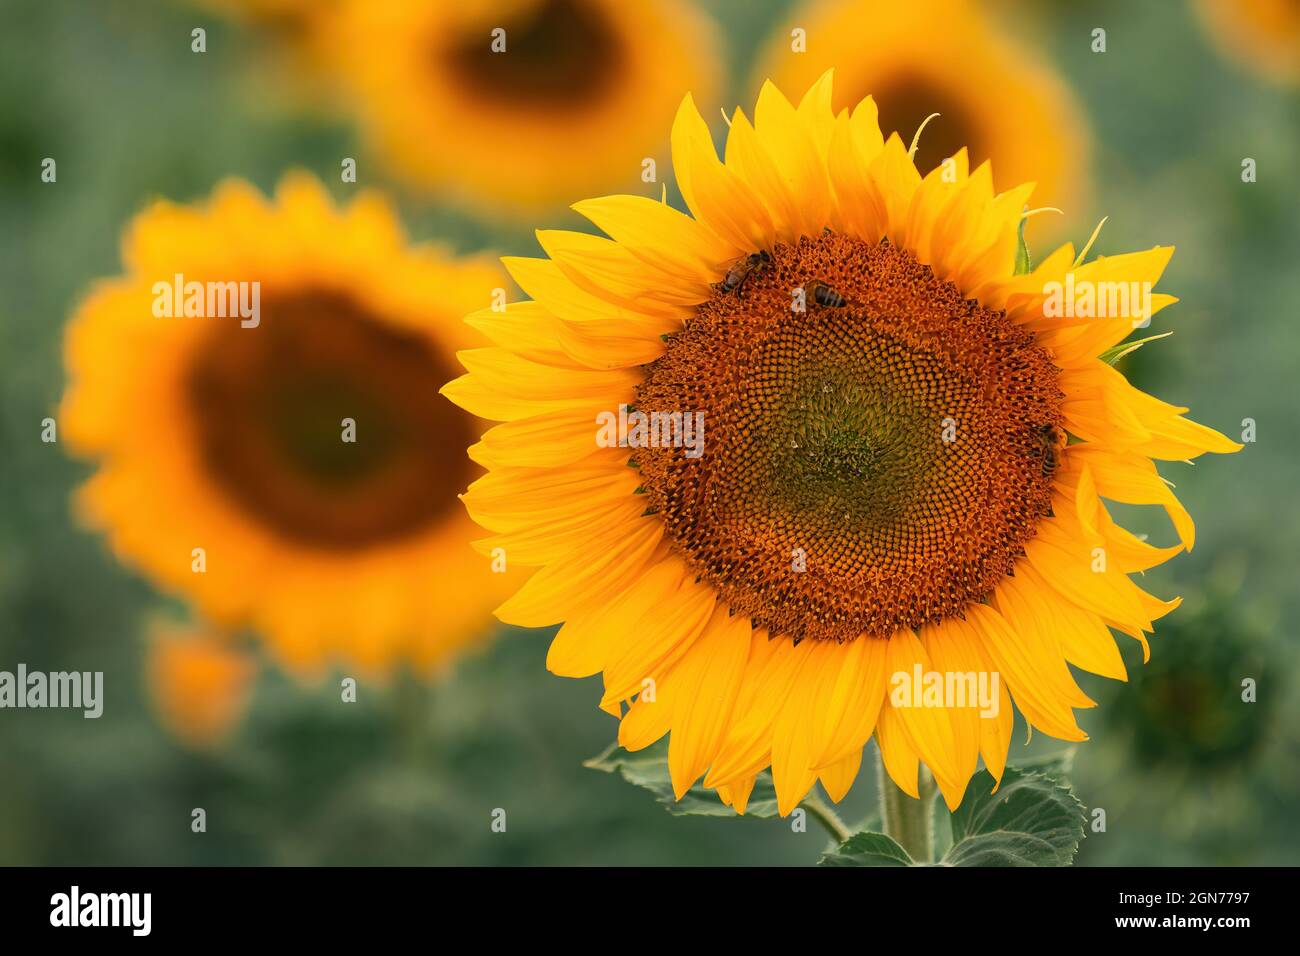 Honey bee pollinating blooming sunflower in field, selective focus Stock Photo